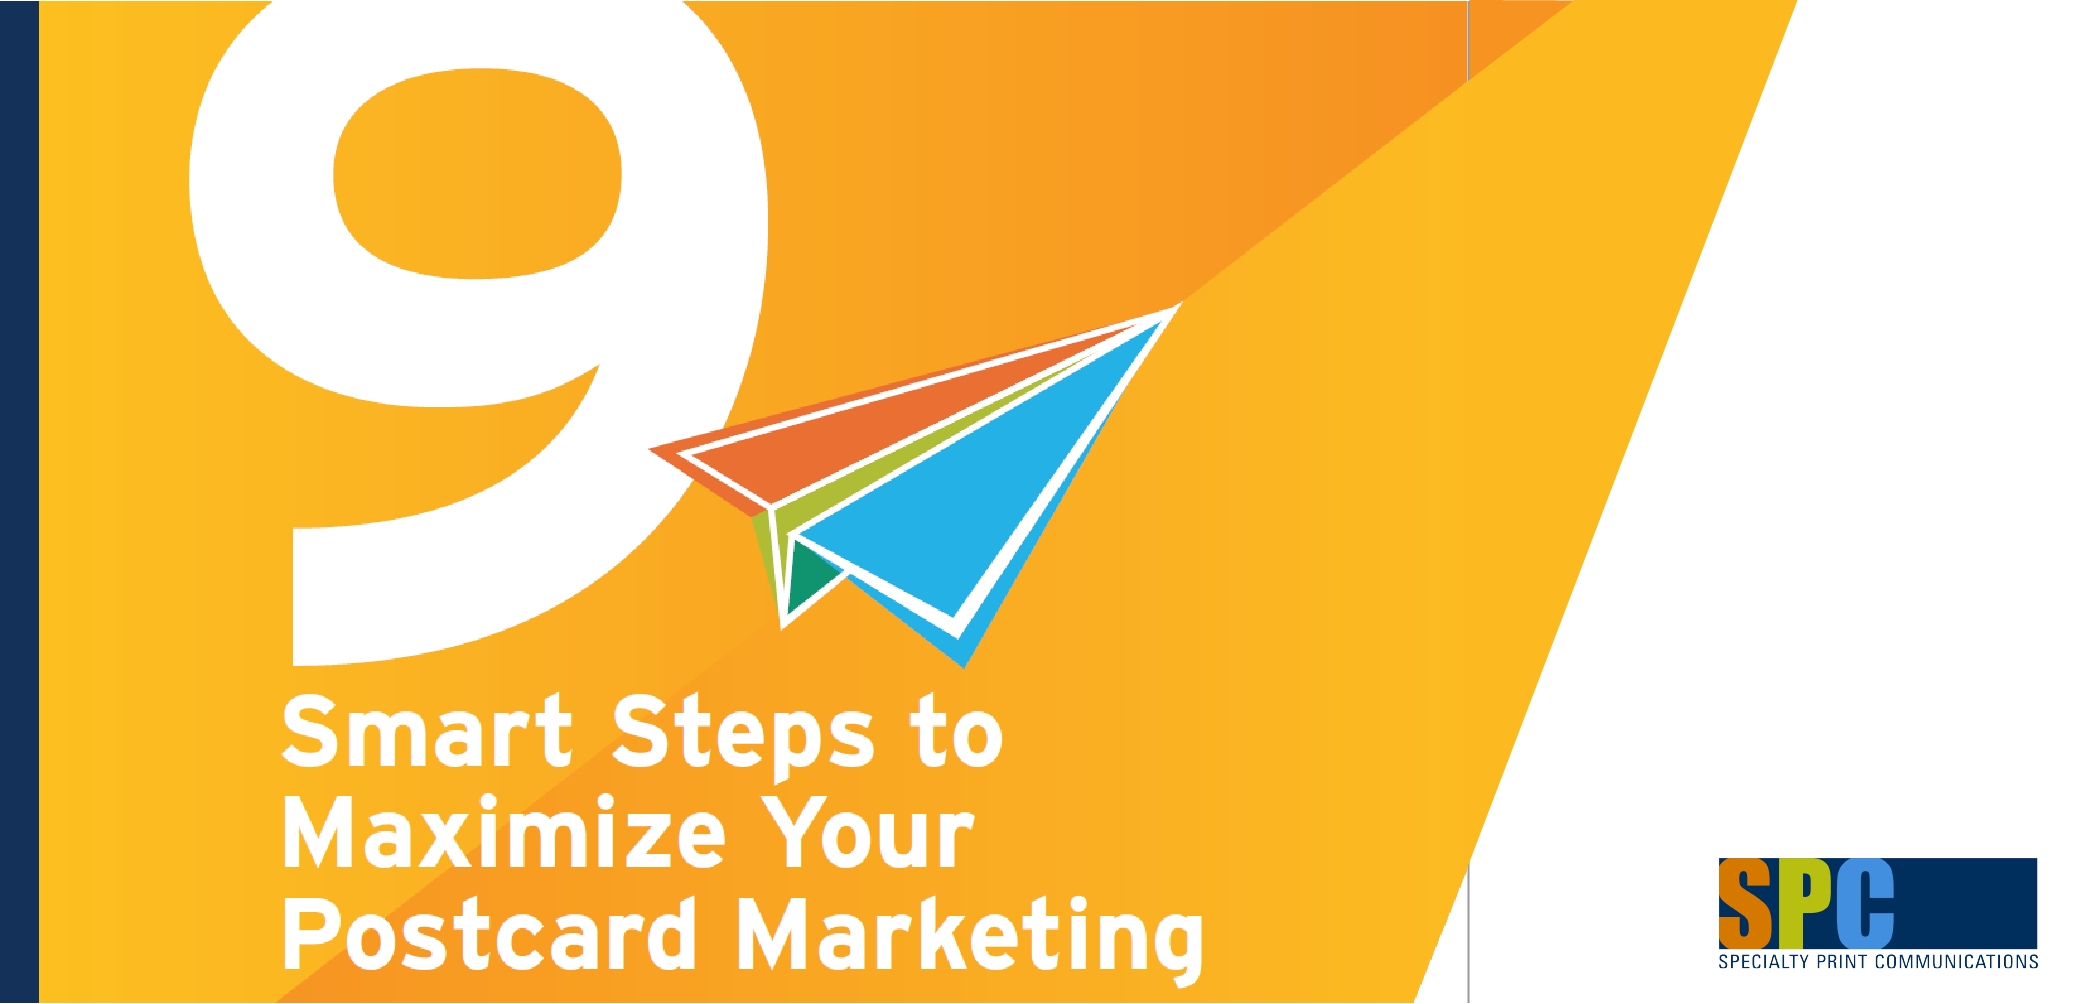 9 Smart Steps to Maximize Your Postcard Marketing